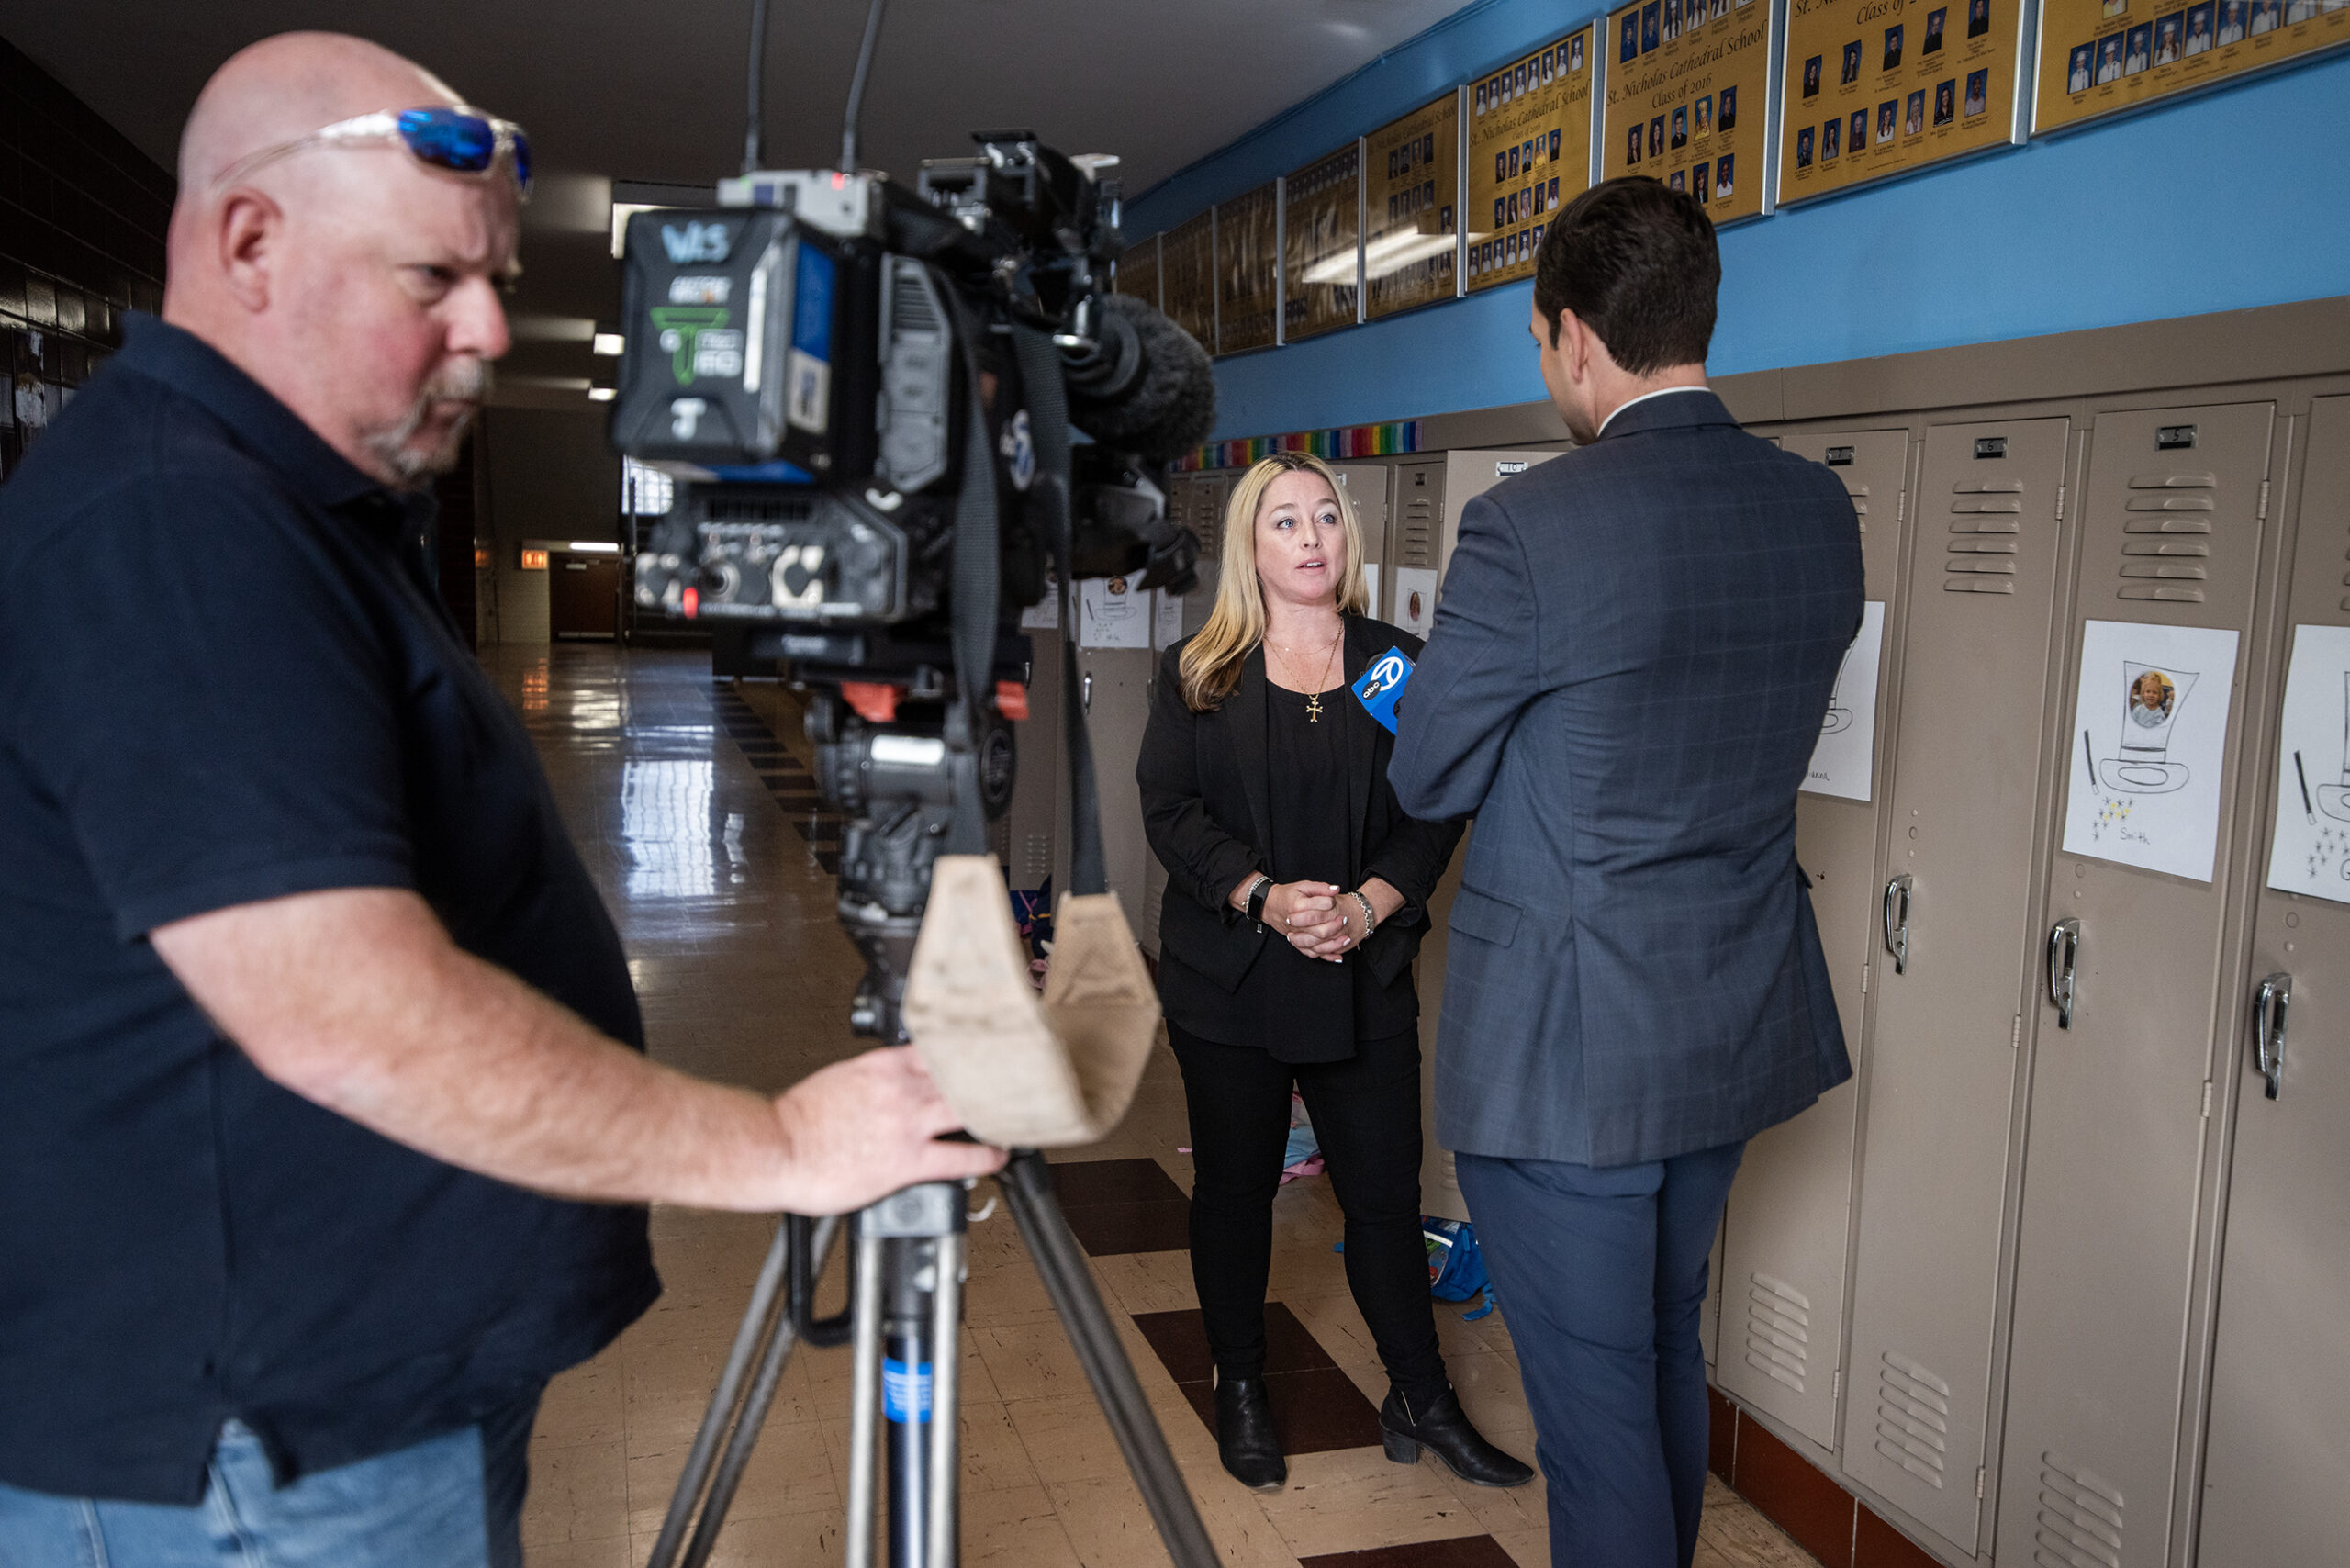 Anna Cirilli speaks with a TV news reporter in front of a camera and lockers inside a school.